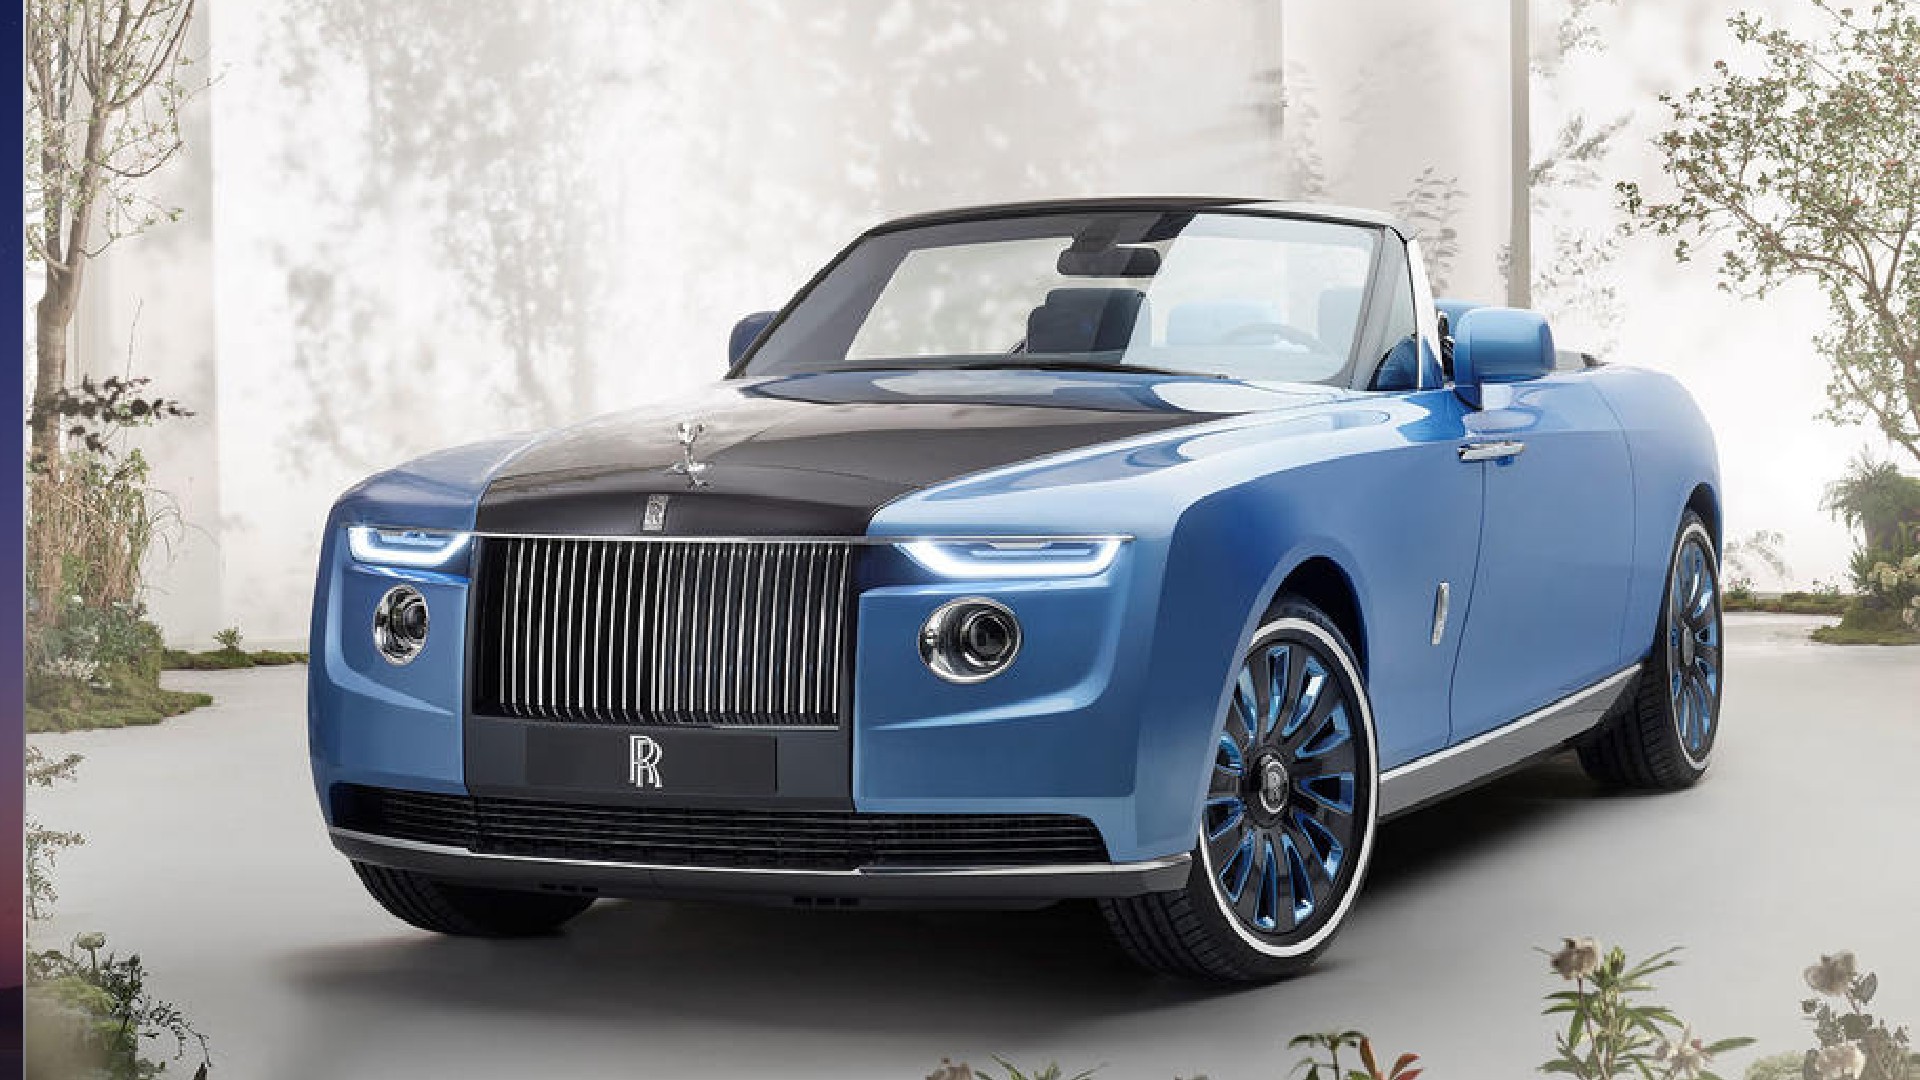 World’s most Expensive New car: Rolls-Royce’s £20m Boat Tail Revealed